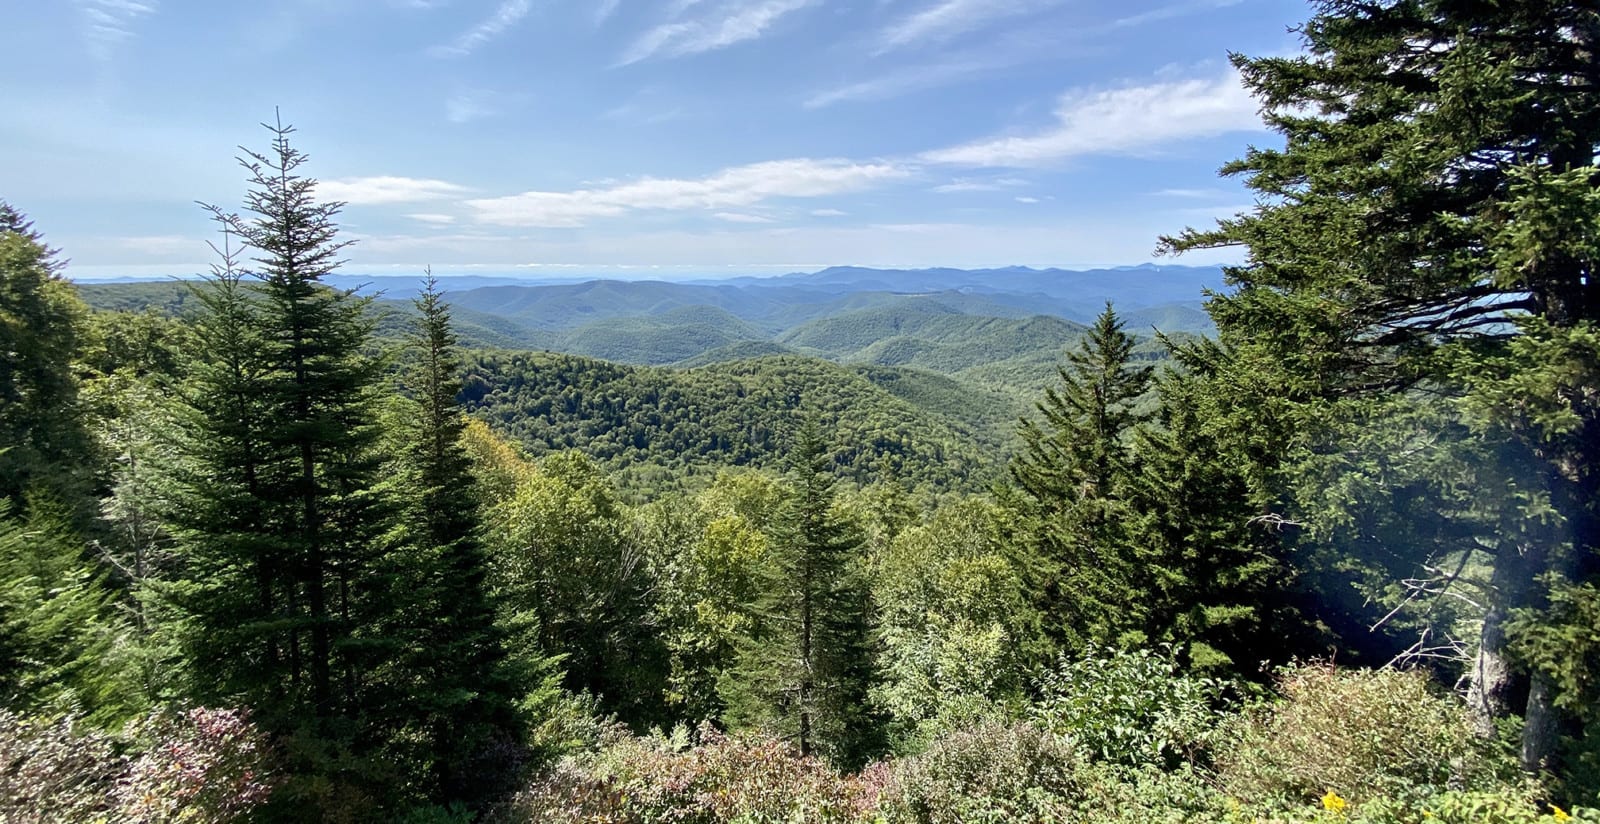 View of southern Appalachians